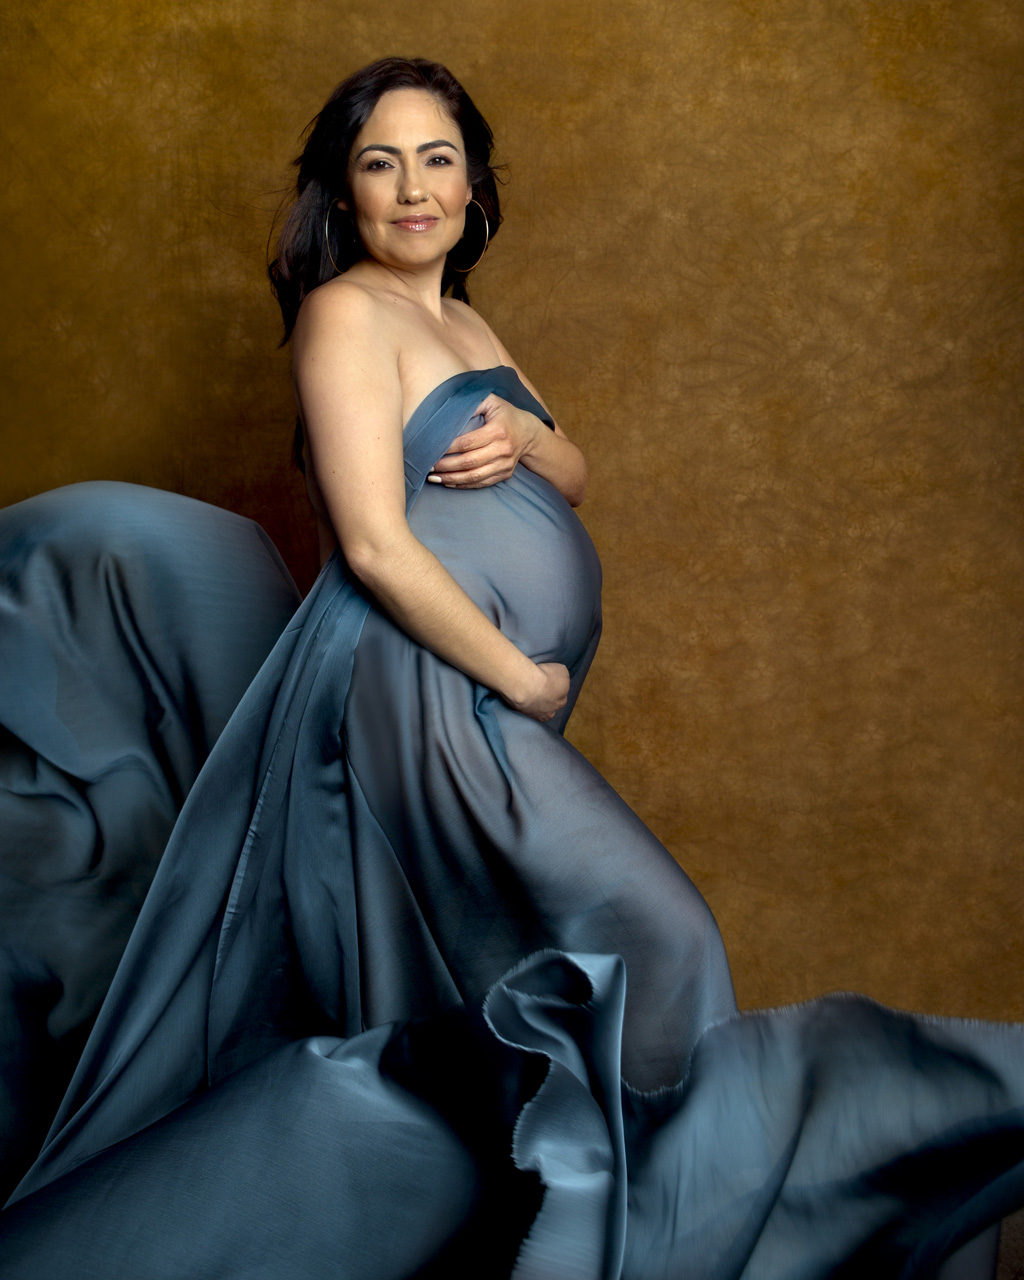 Color maternity portrait of a woman draped in flowing blue chiffon fabric.